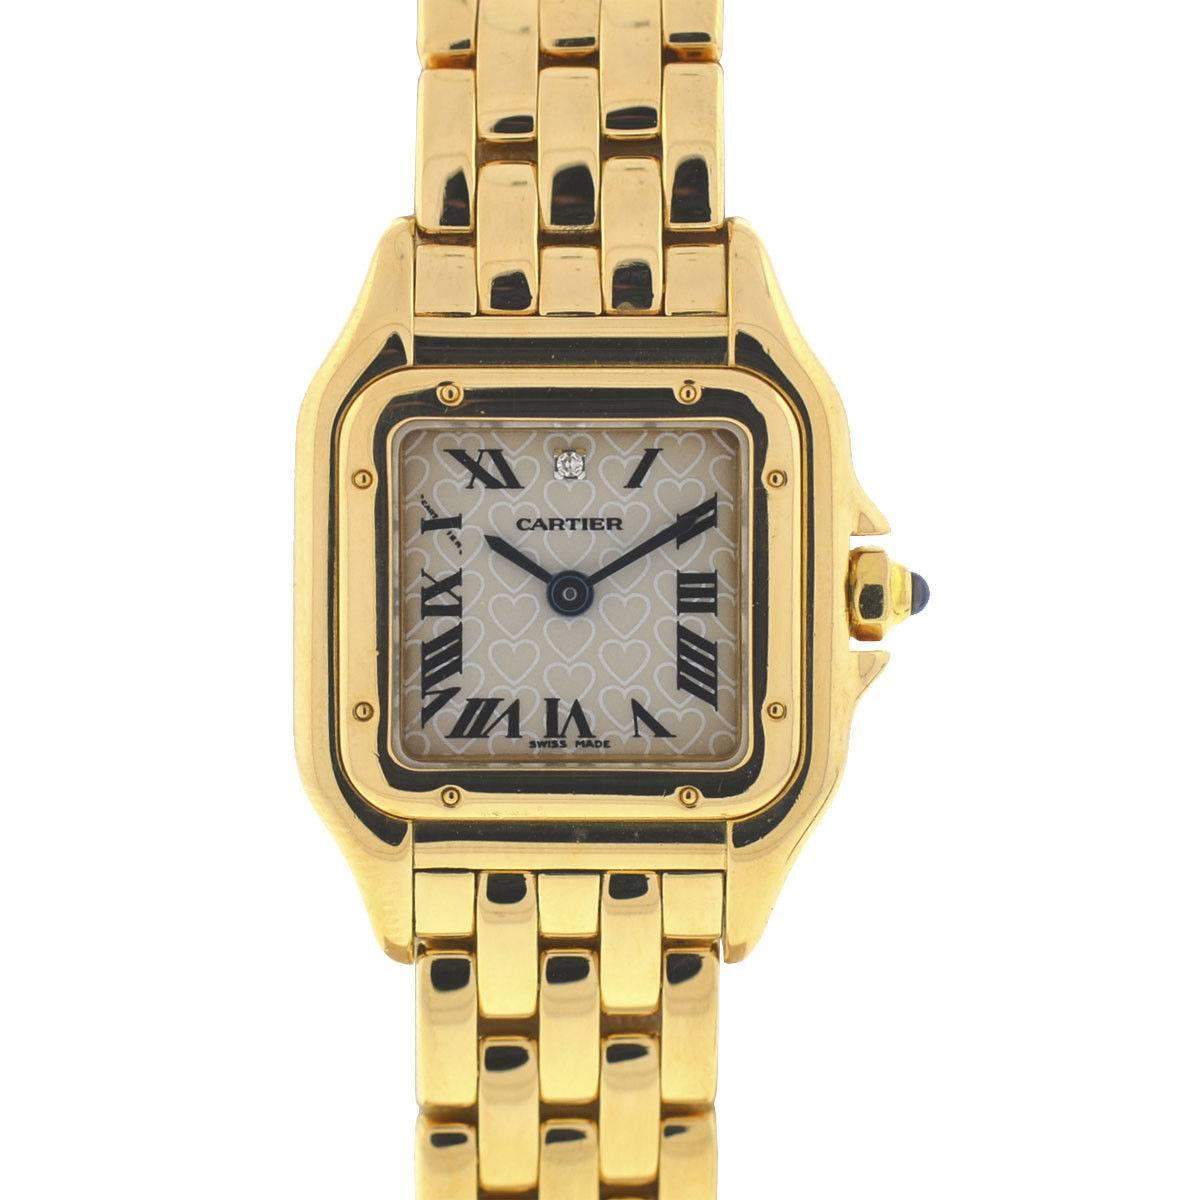 Company - Cartier
Style - Dress
Model -Panthere
Reference Number - 1070
Case Metal - 18k Yellow Gold 
Case Measurement - 21mm
Bracelet - 18k Yellow Gold
Dial - Hearts and 1 diamond at 12 o'clock
Bezel - 18k Yellow Gold
Crystal - Sapphire
Movement -